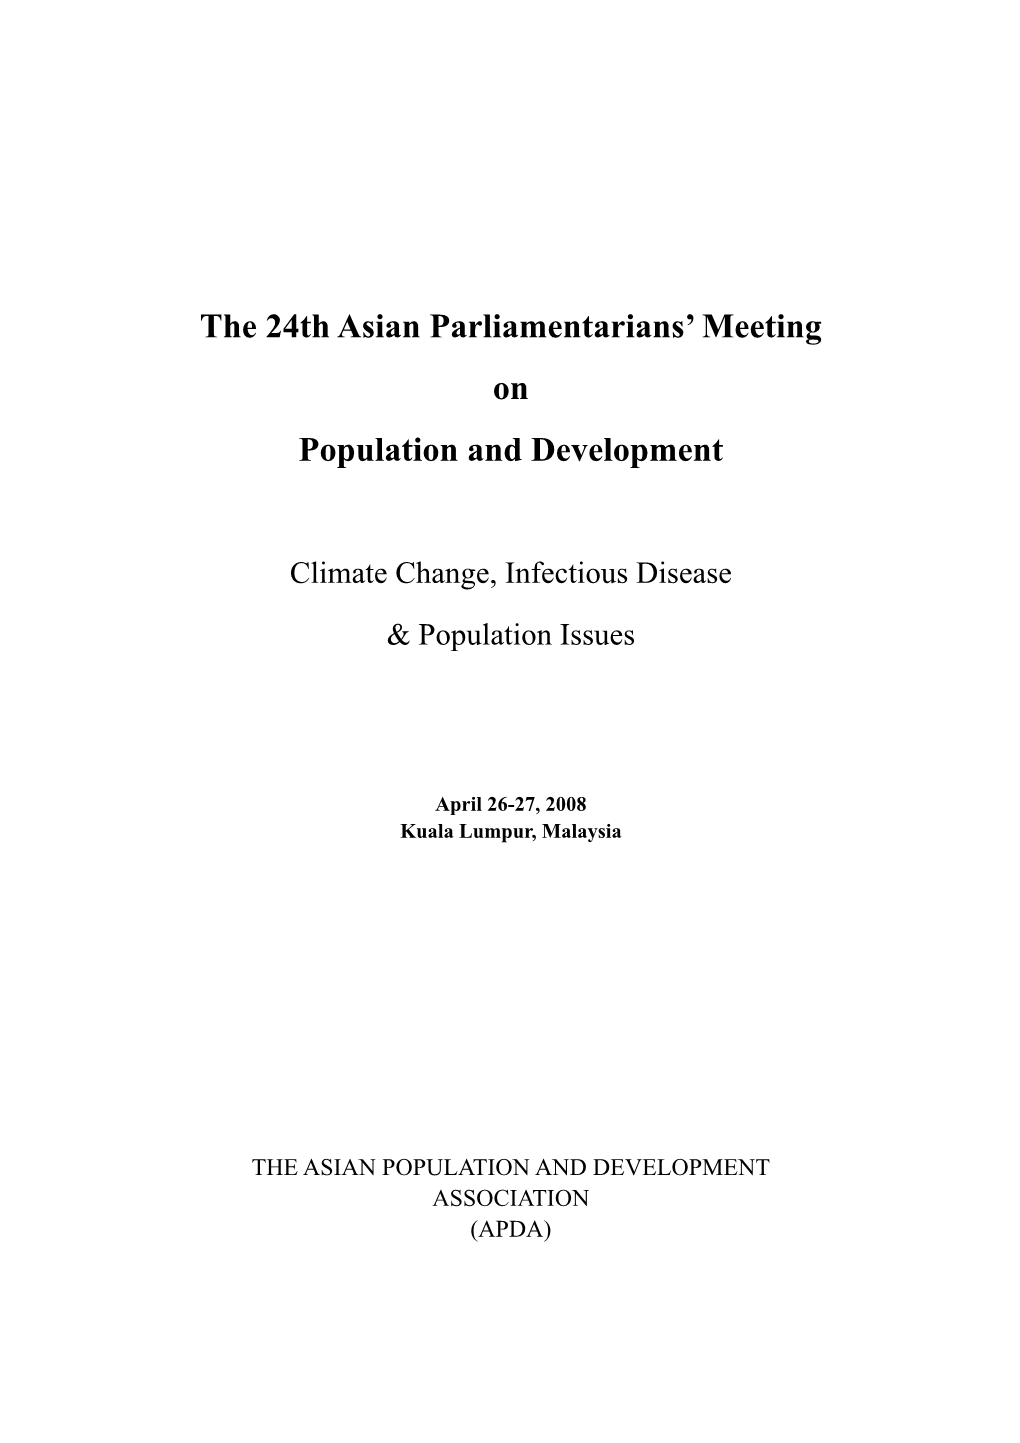 The 24Th Asian Parliamentarians' Meeting on Population And